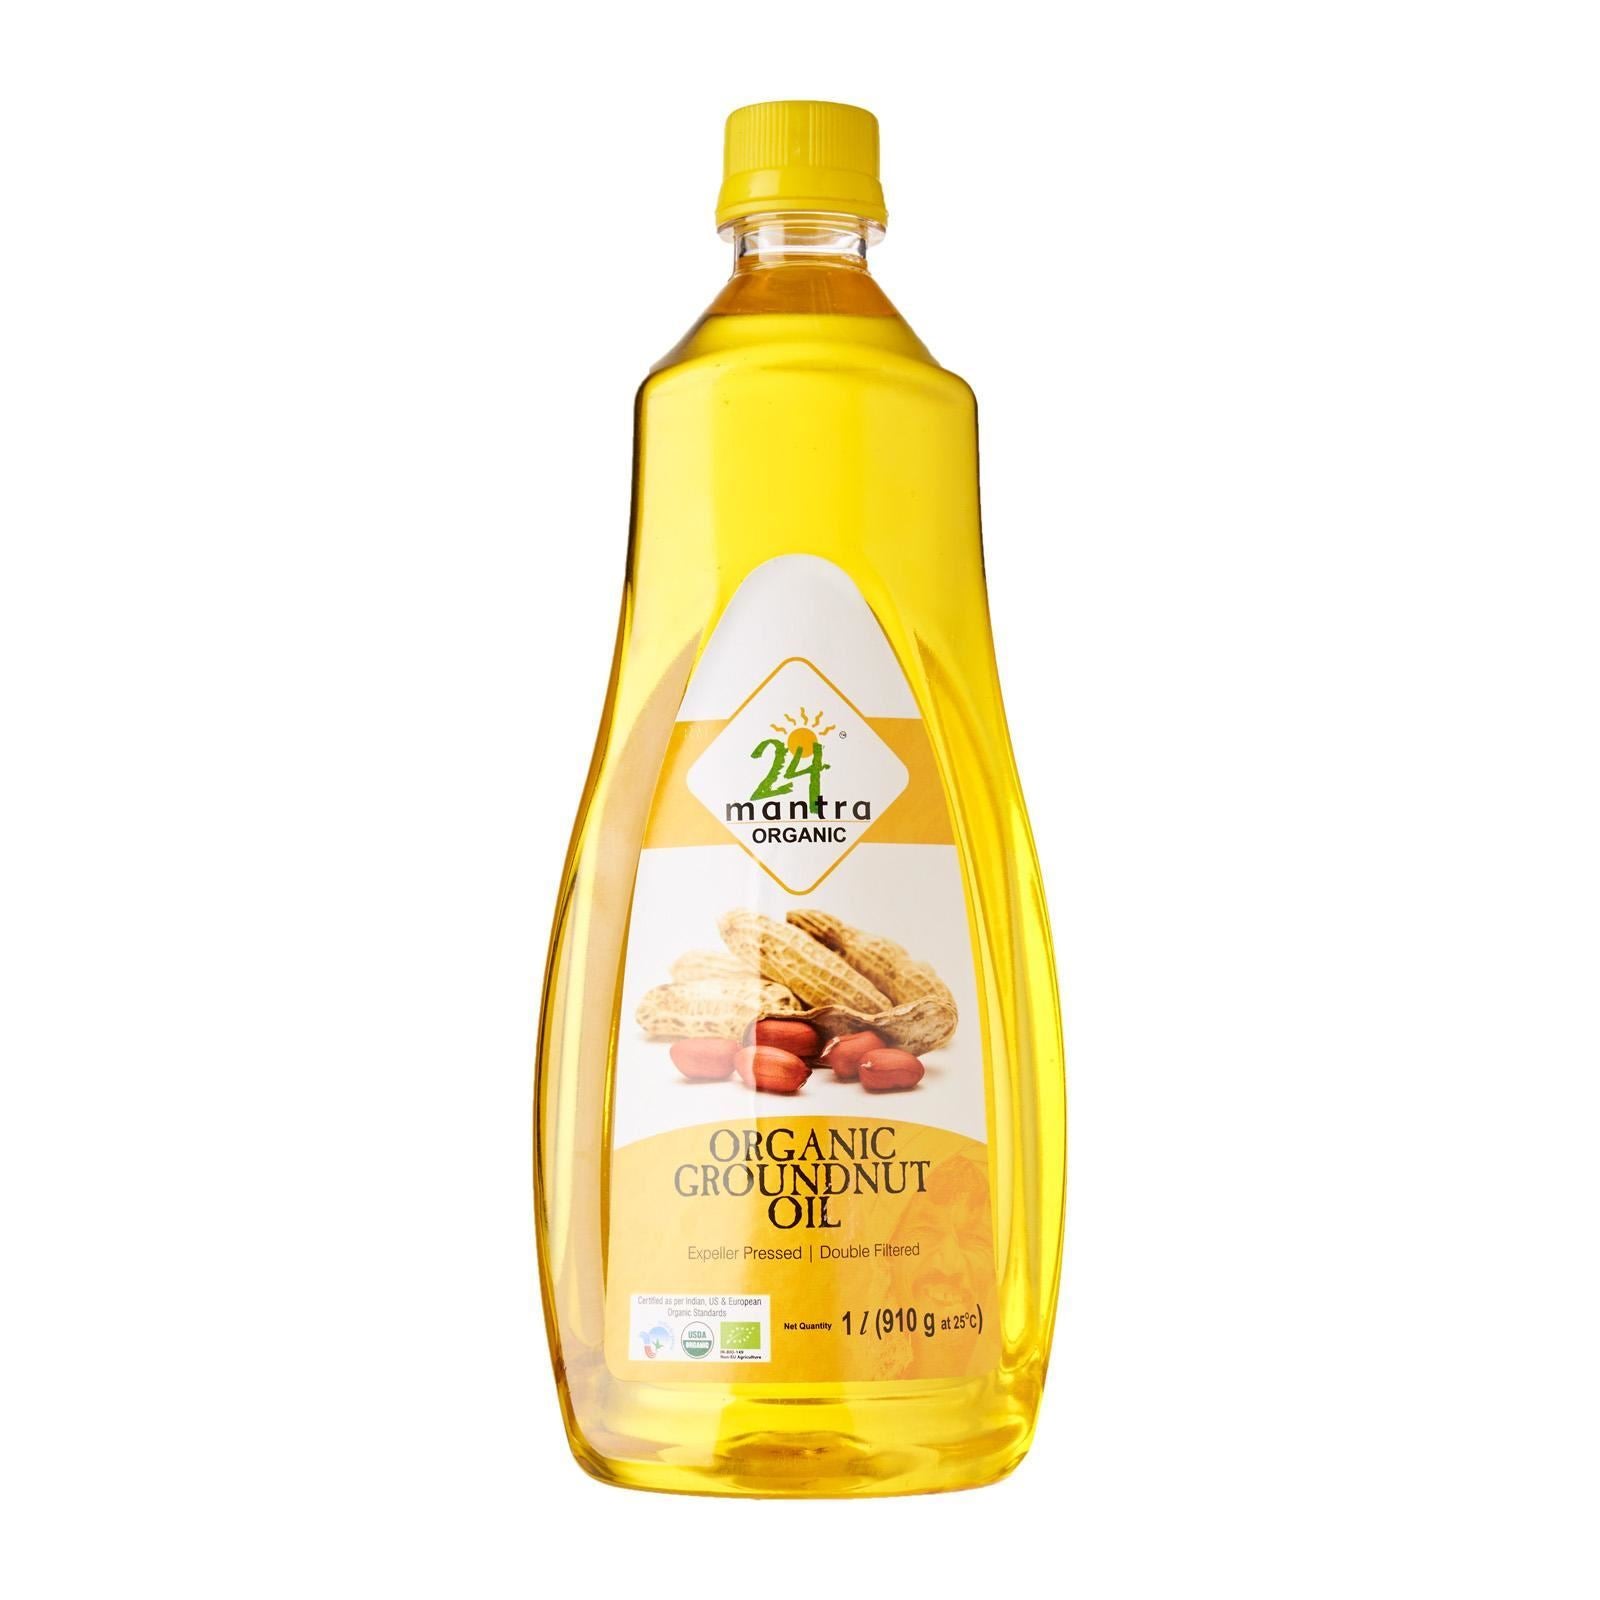 24 MANTRA Groundnut Oil (Certified ORGANIC)